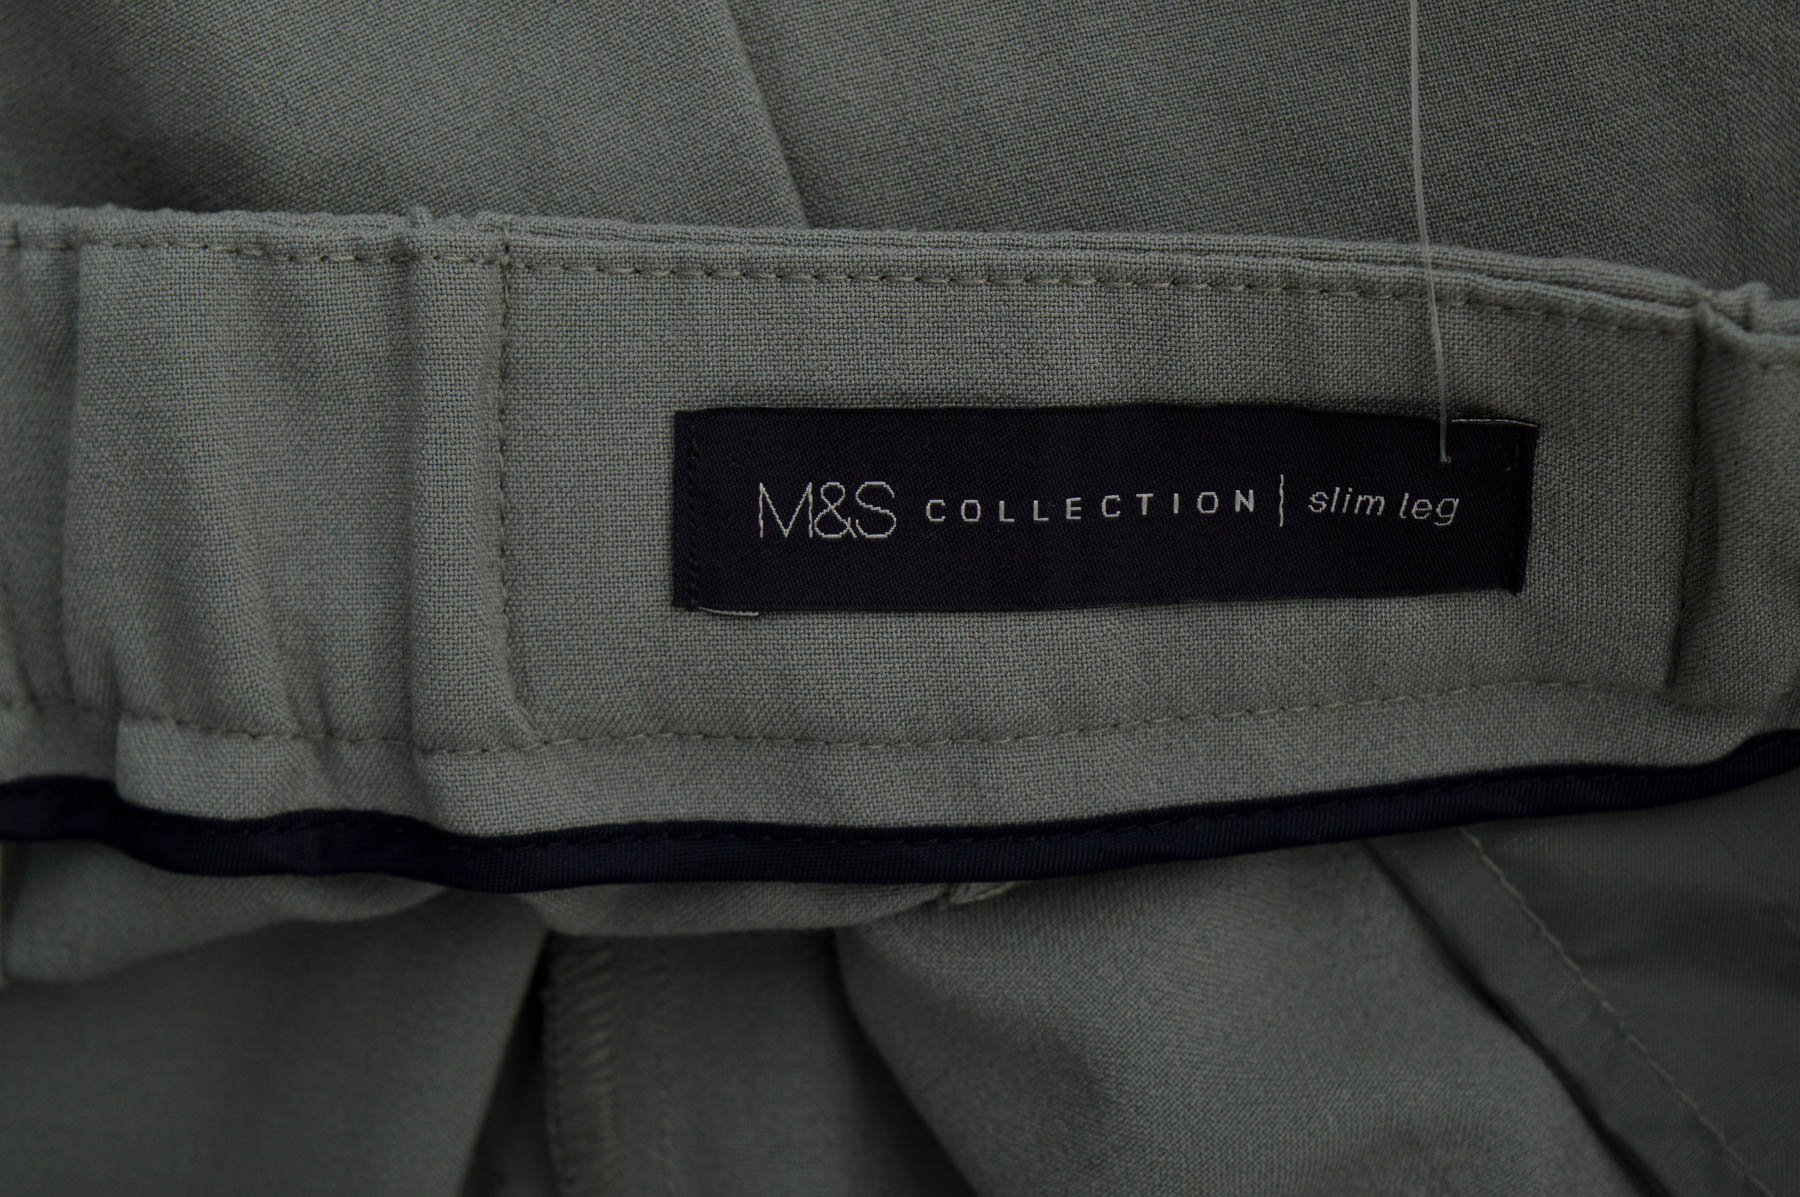 Women's trousers - M&S COLLECTION - 2